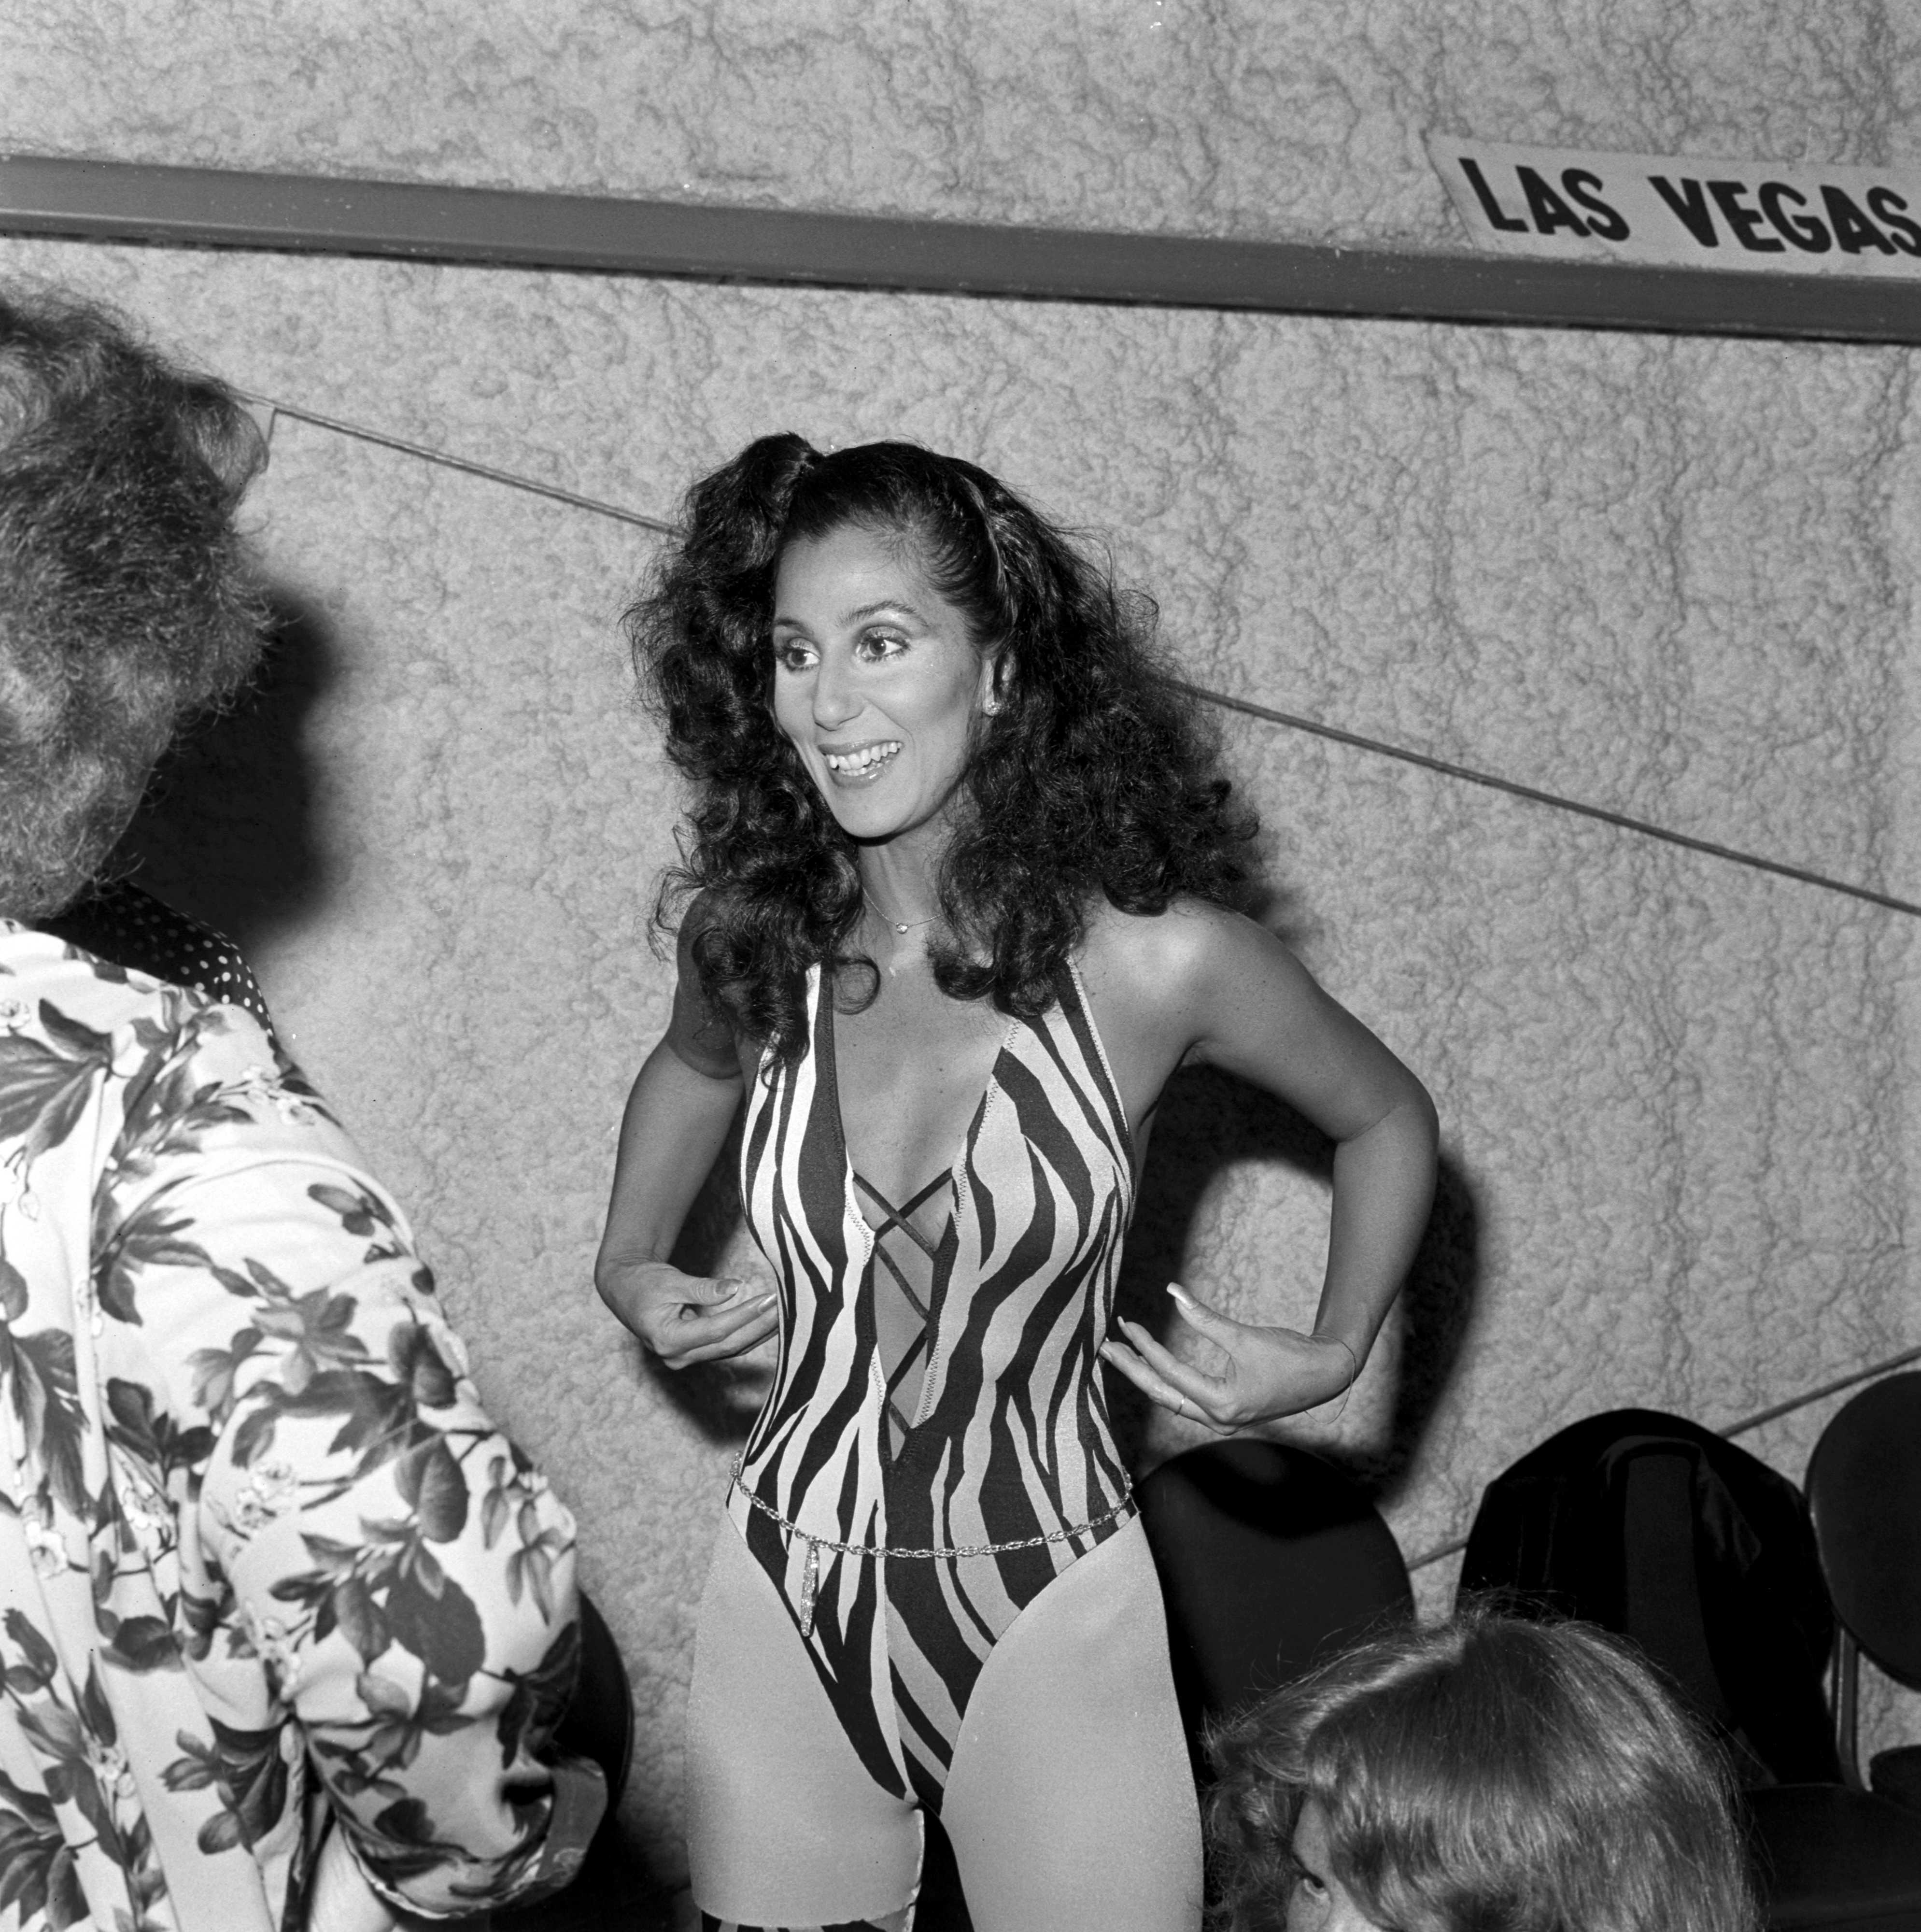 A Brief History of Cher’s Iconic Style and Best Fashion Moments